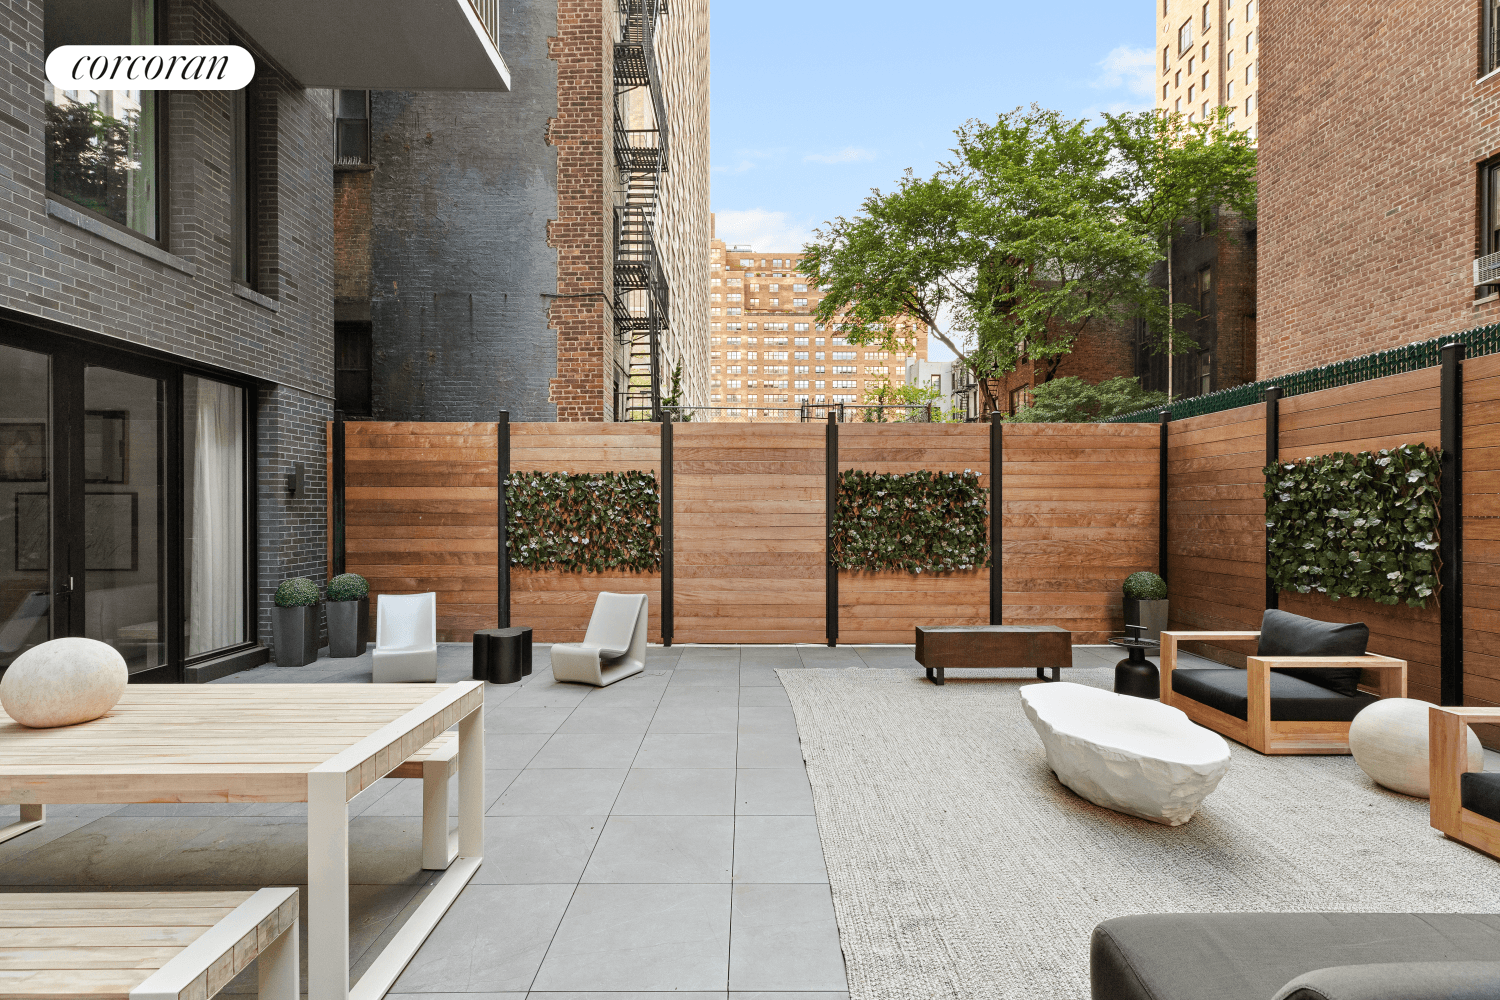 First showing Saturday 5 18 Open House from 10 11 30 by AppointmentMaisonette at 323 East 79th StreetFour Bedrooms Three Baths Powder Room2, 670 Interior Square FeetPrivate Garden with 792 ...